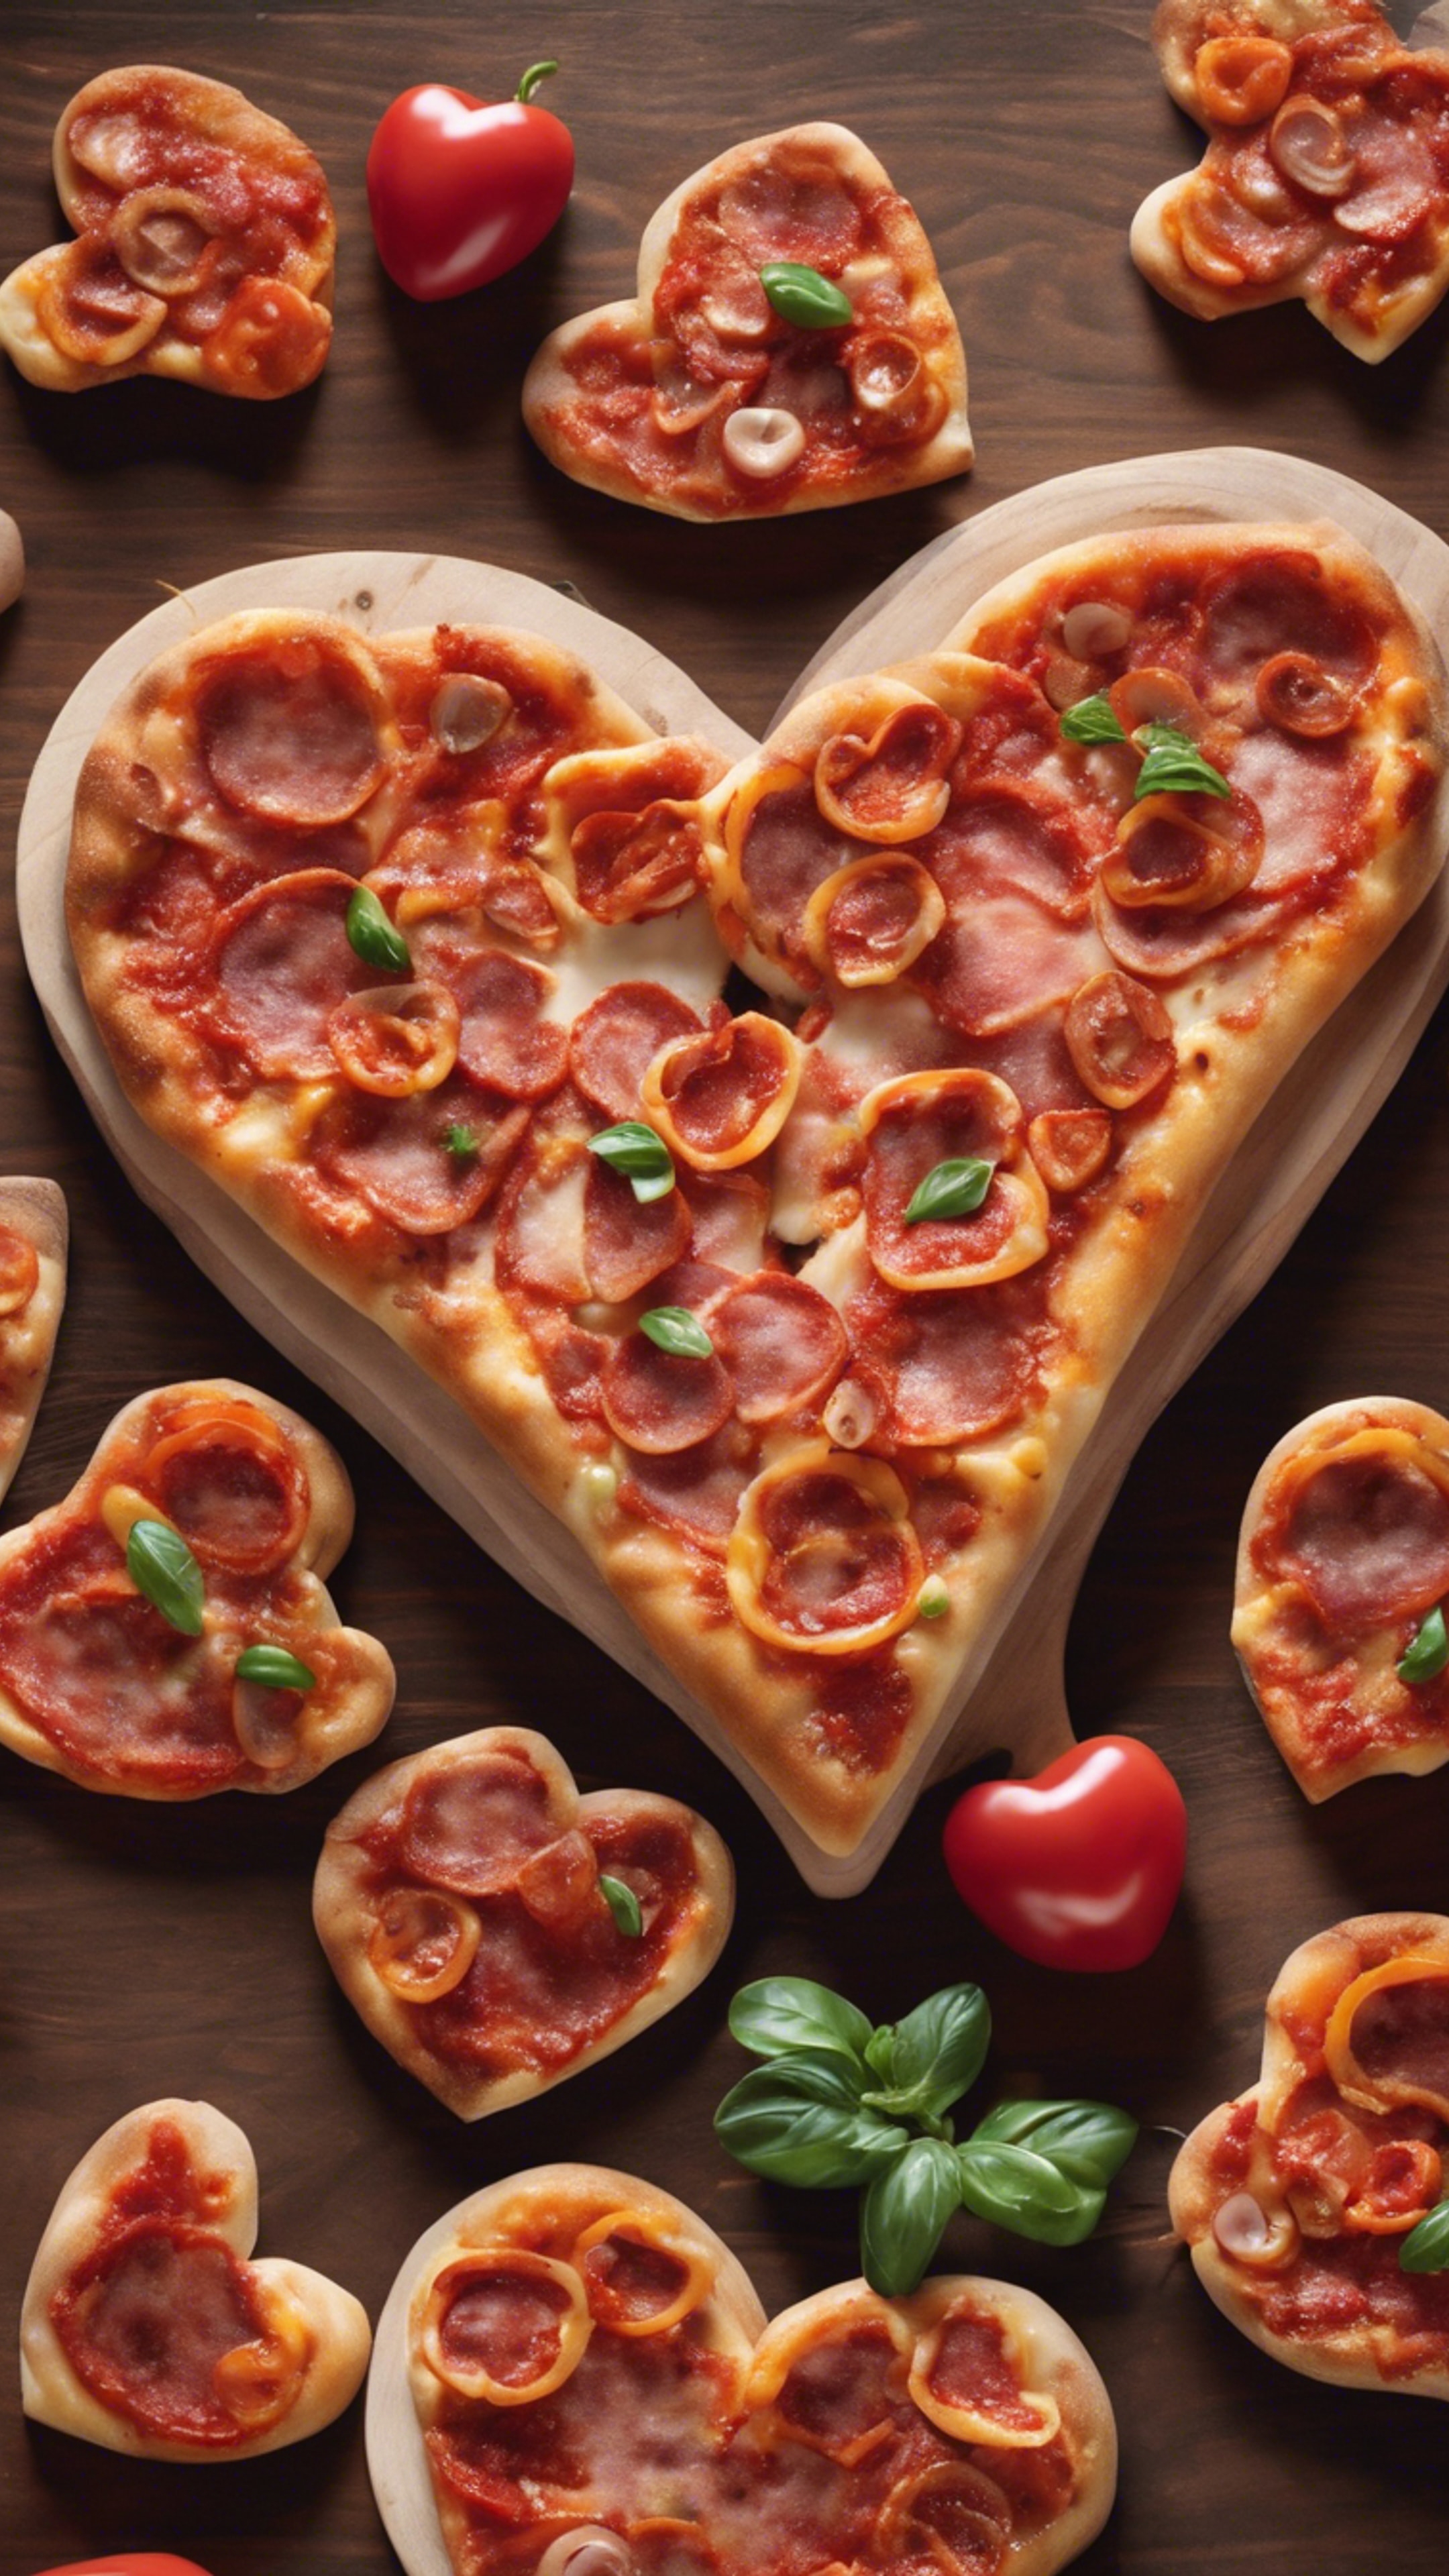 A heart-shaped pizza topped with pepperonis arranged in a smaller heart shape, the perfect cuisine for a romantic date. Wallpaper[15df62b77c2f46a18143]